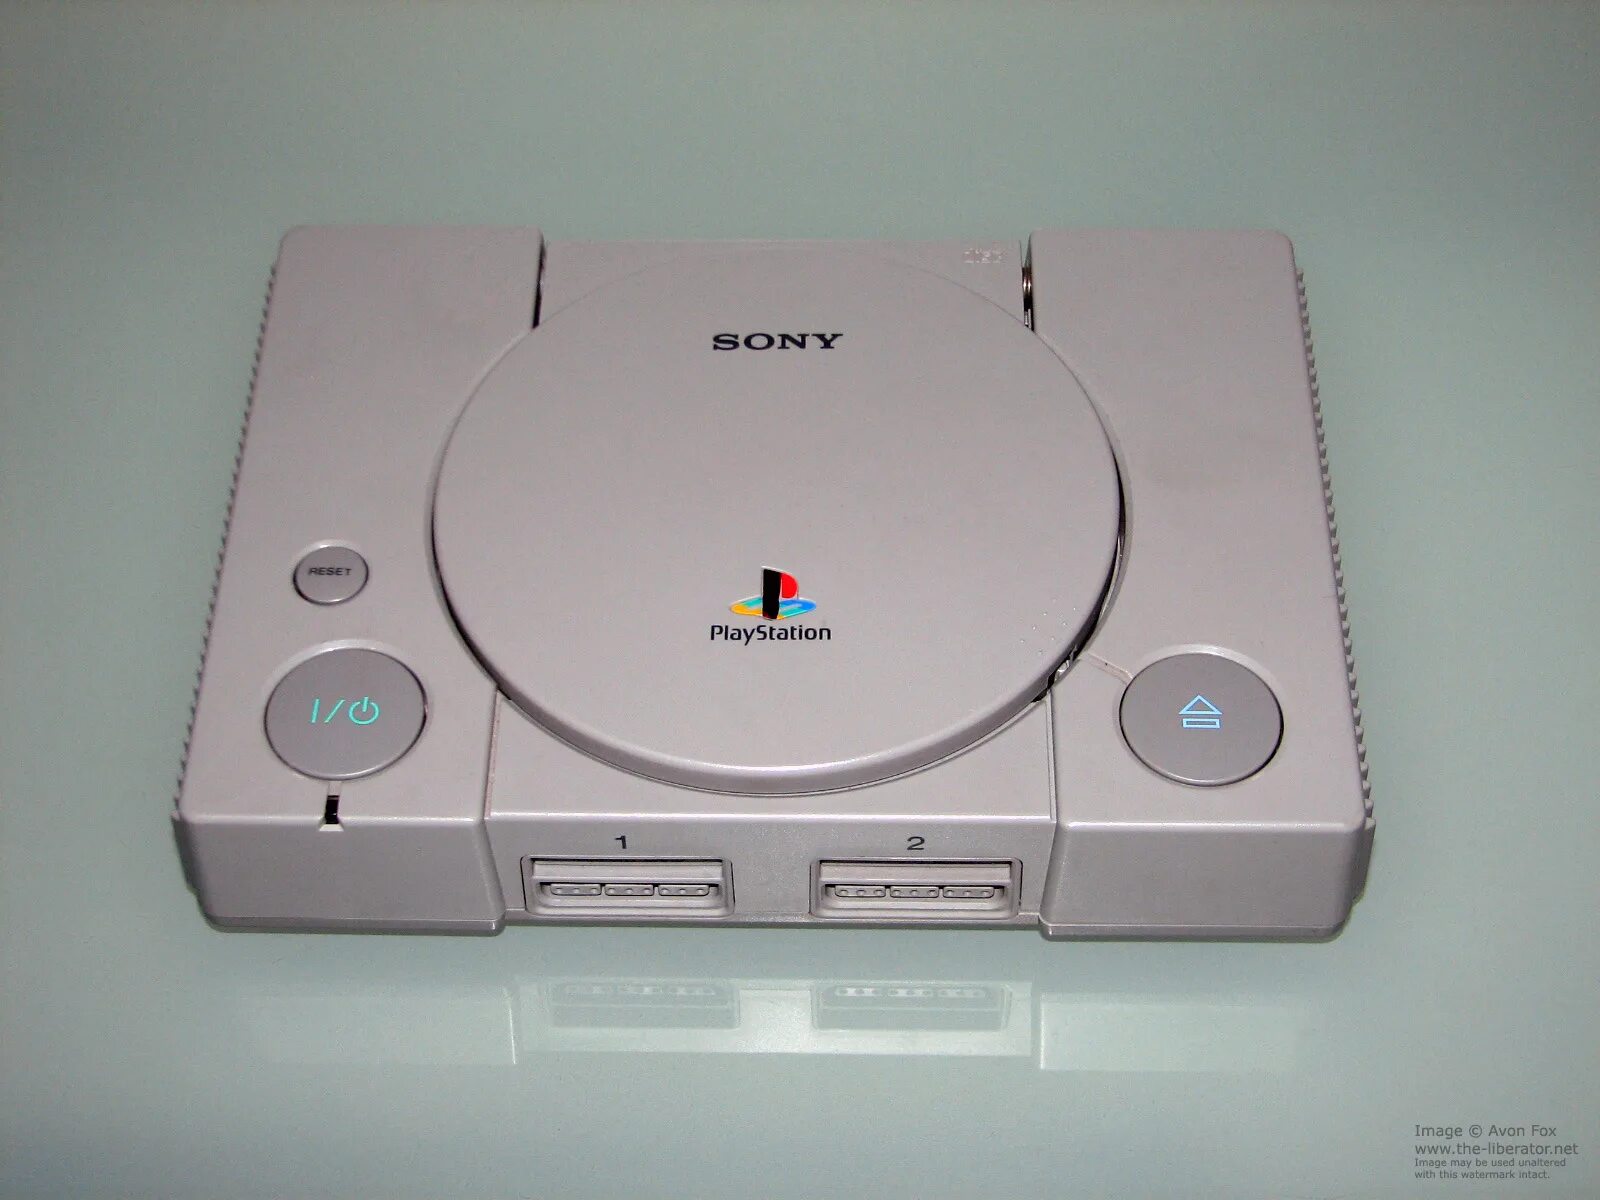 Playstation scph. Sony ps1 SCPH-1001. Sony SCPH 7502. Ps1 SCPH-5002. Ps1 SCPH 1000.